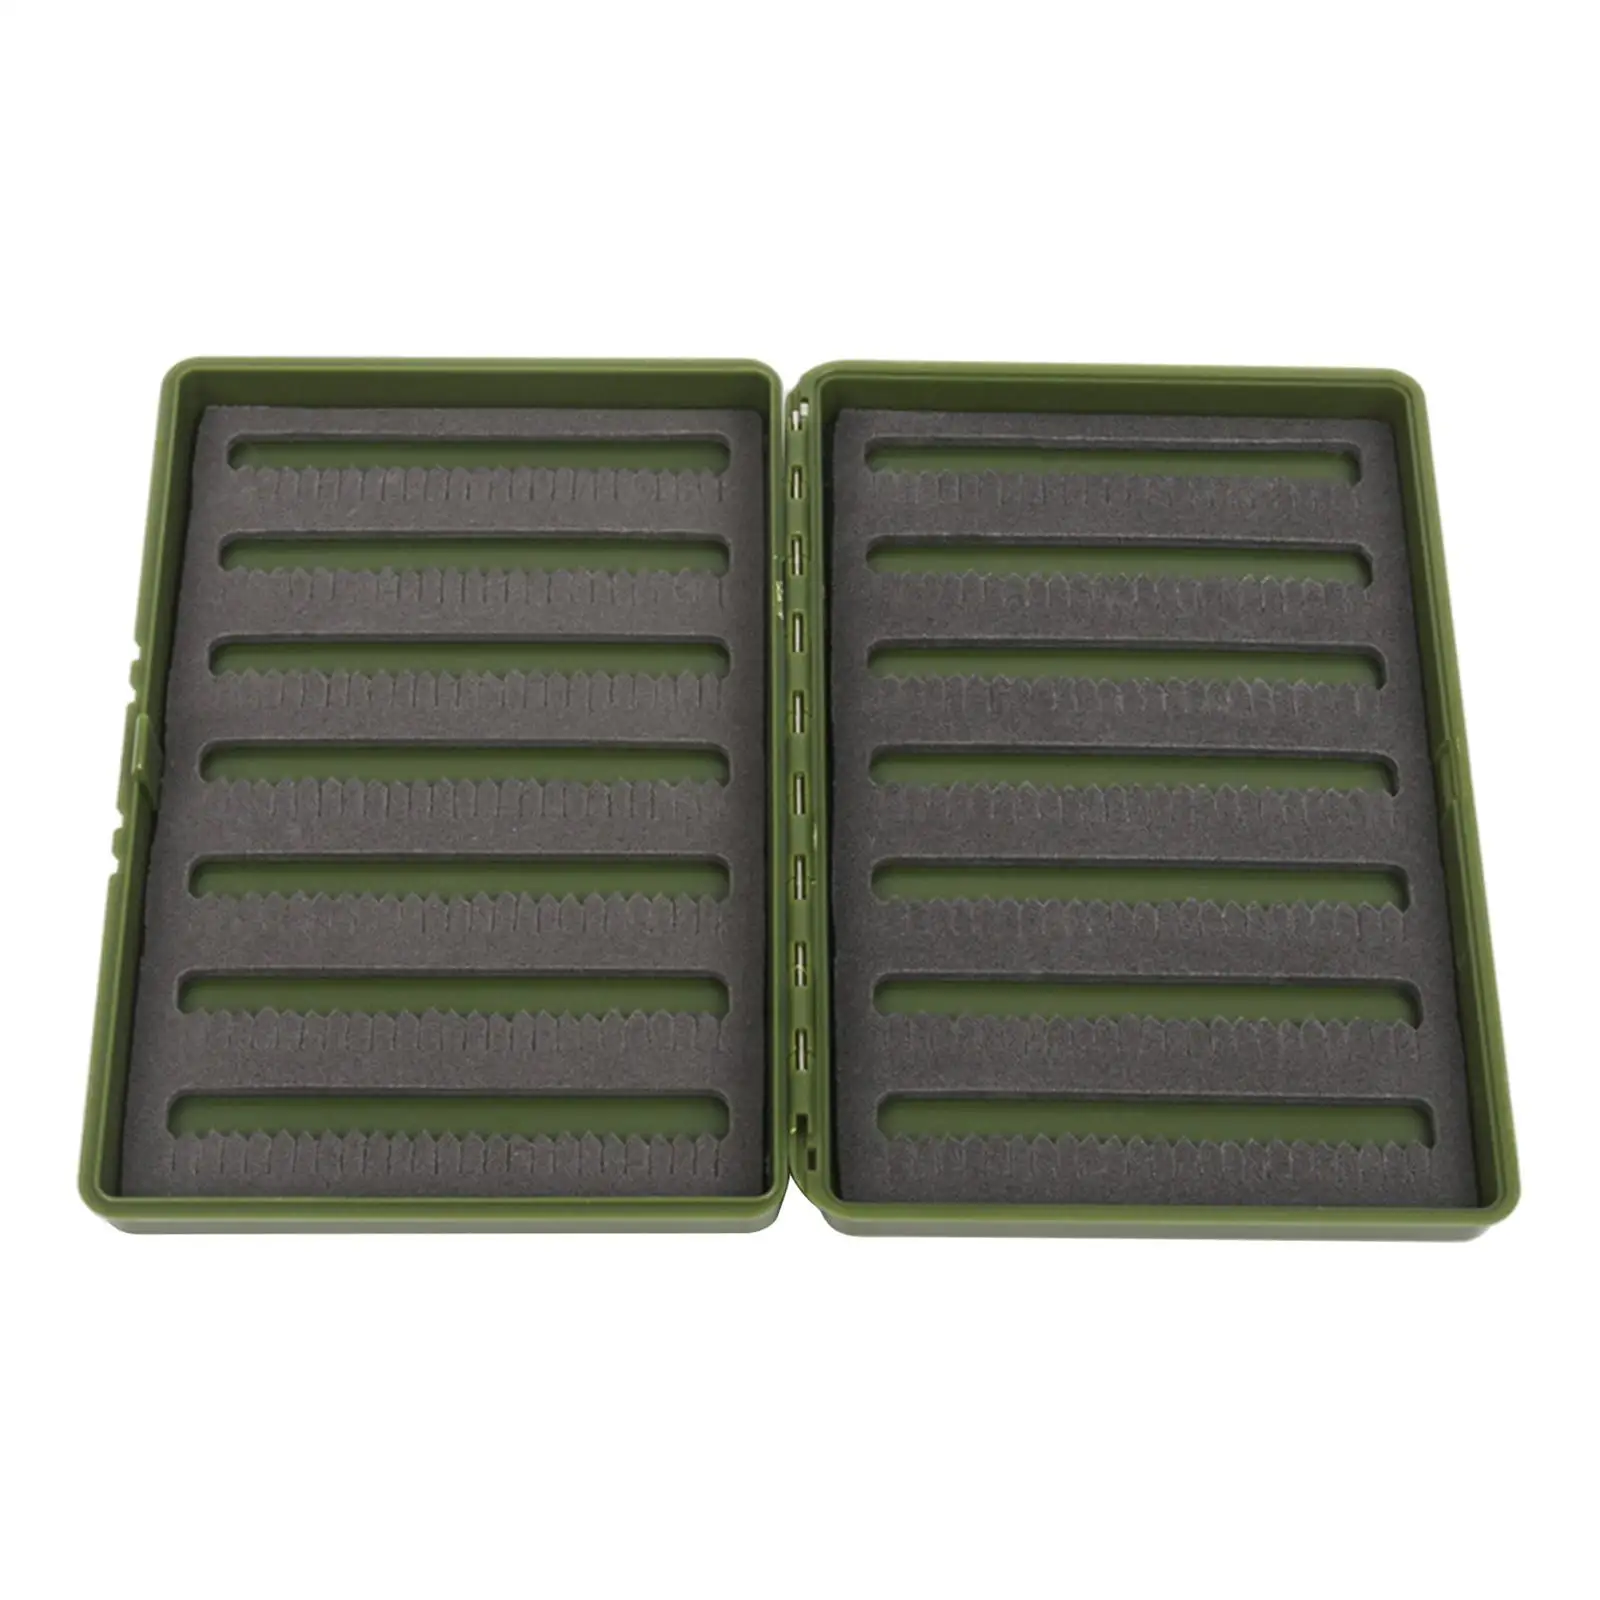 Double Sided Fly Fishing Box Portable Fishing Lure Bait Hooks Storage Case Organizer Streamer Flies Container Fishing Gear